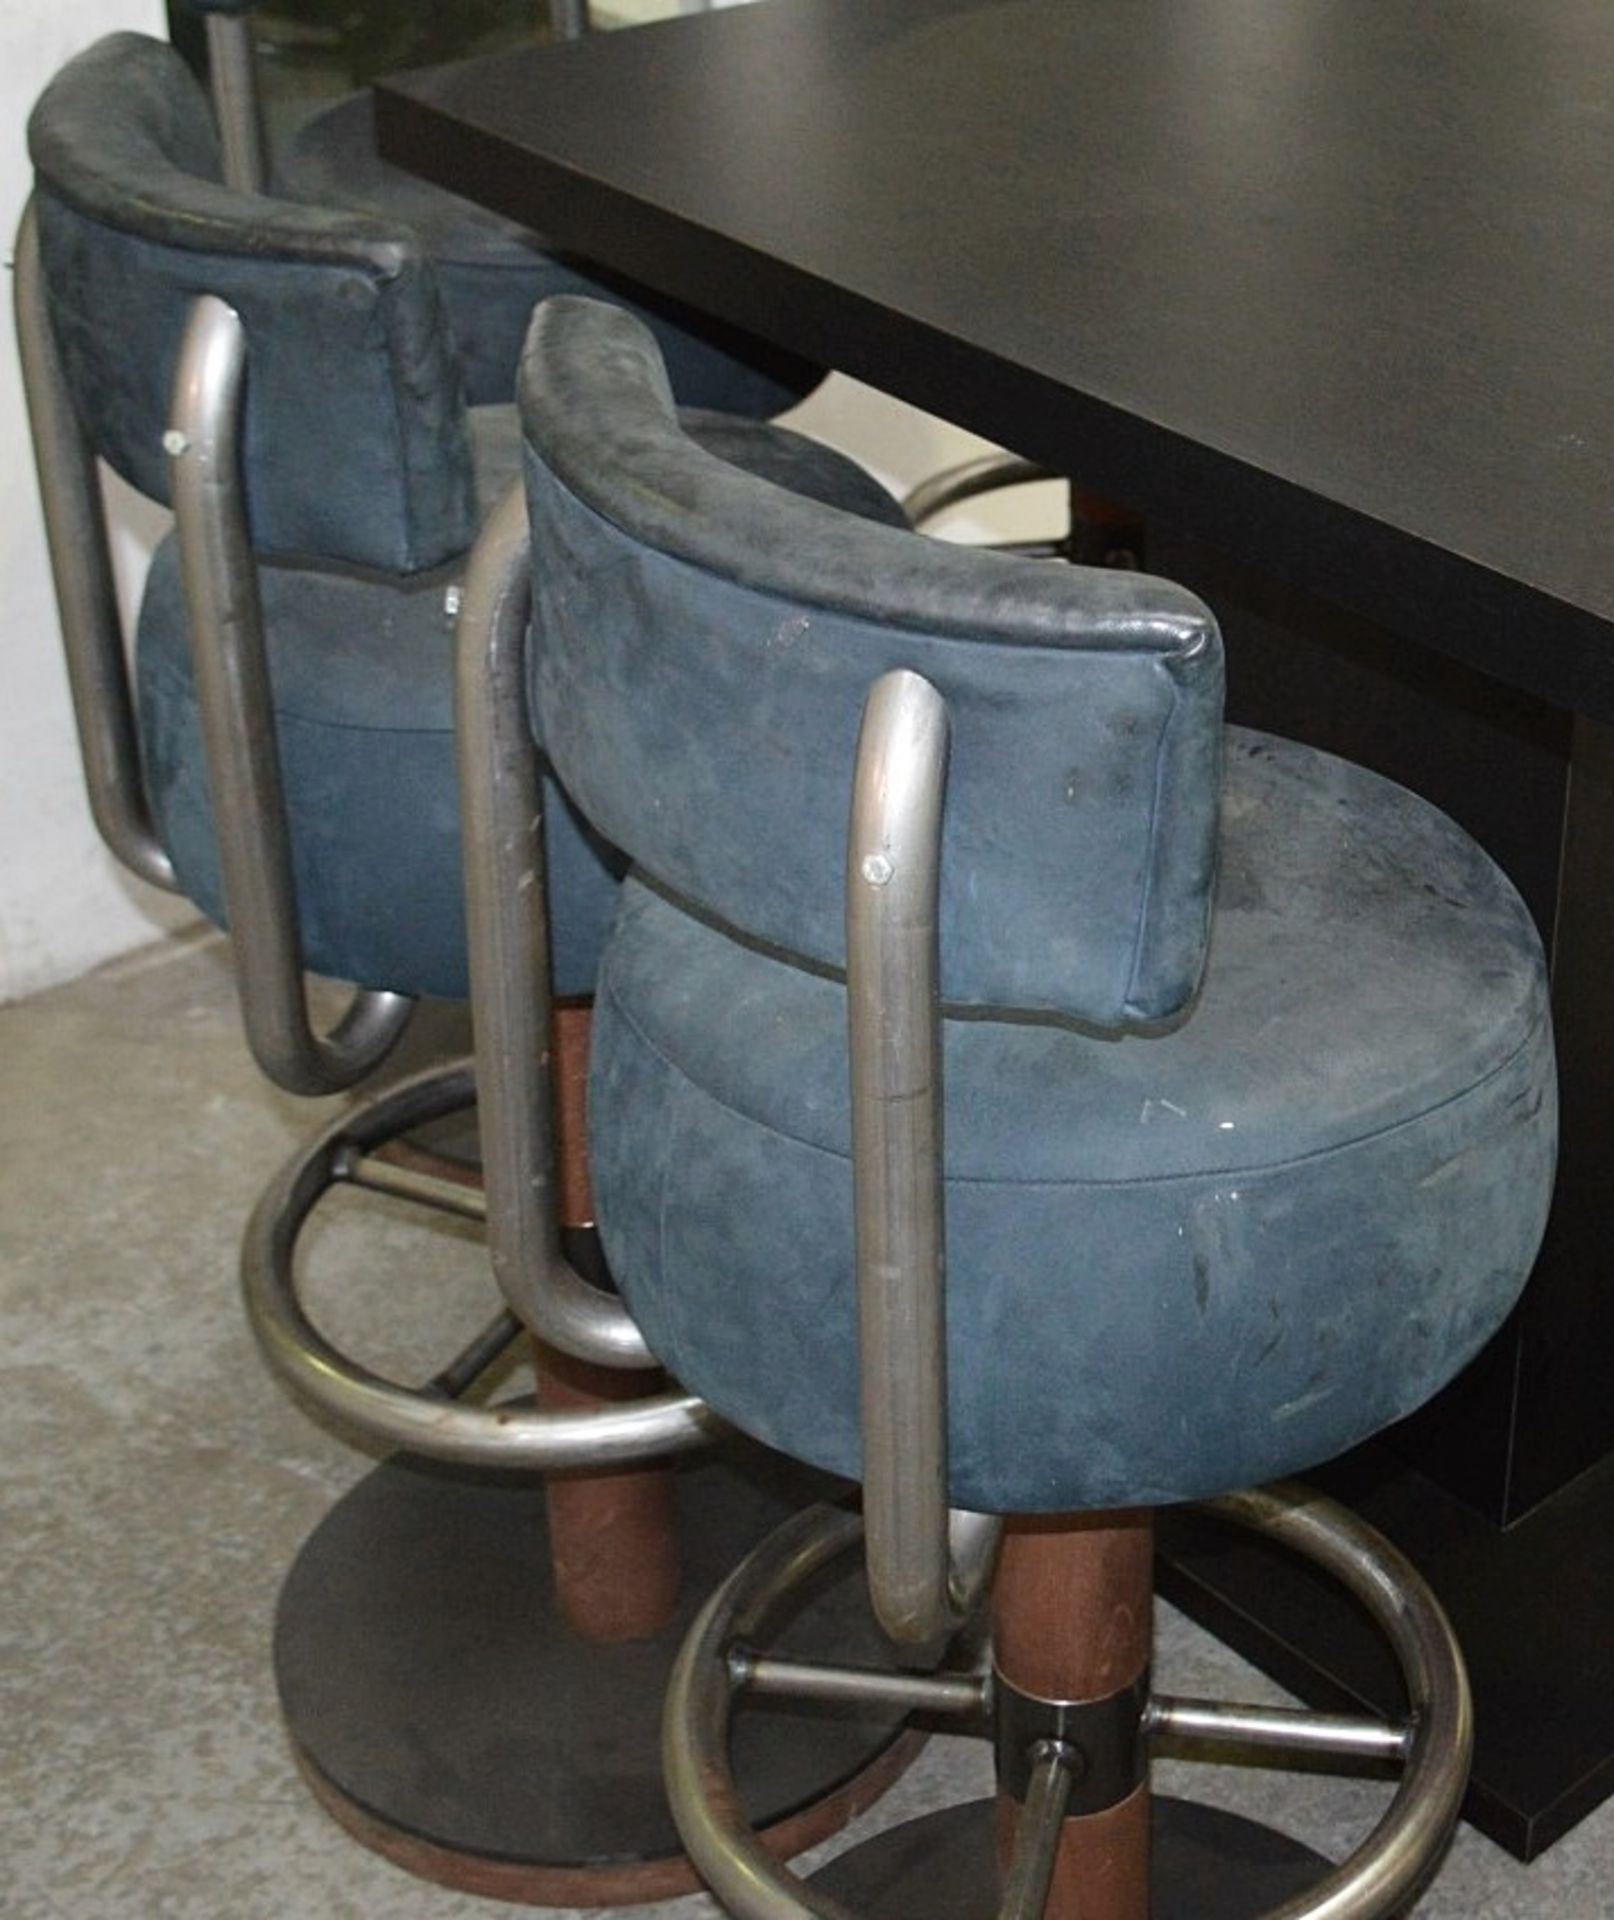 3 x Commercial Industrial-Style Hand-Built Stools With Tough Leather Upholstery And Circular - Image 3 of 5